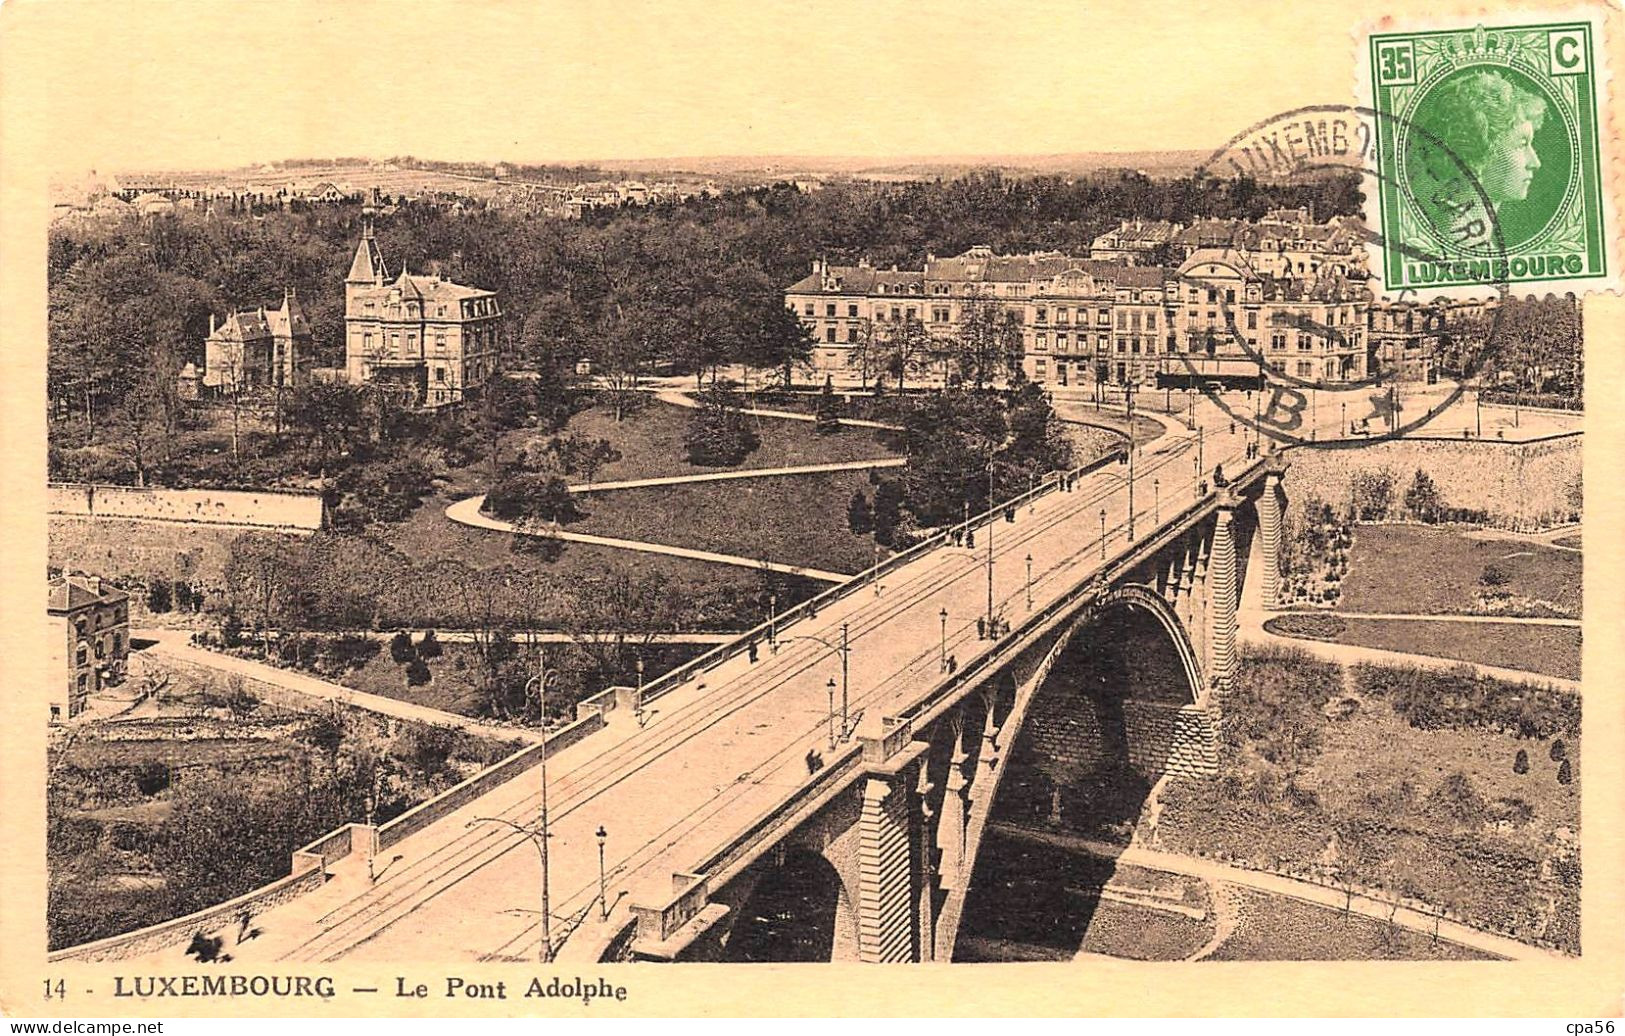 Le PONT ADOLPHE - LUXEMBOURG - Cachet LUXEMBOURG GARE B - Luxembourg - Ville